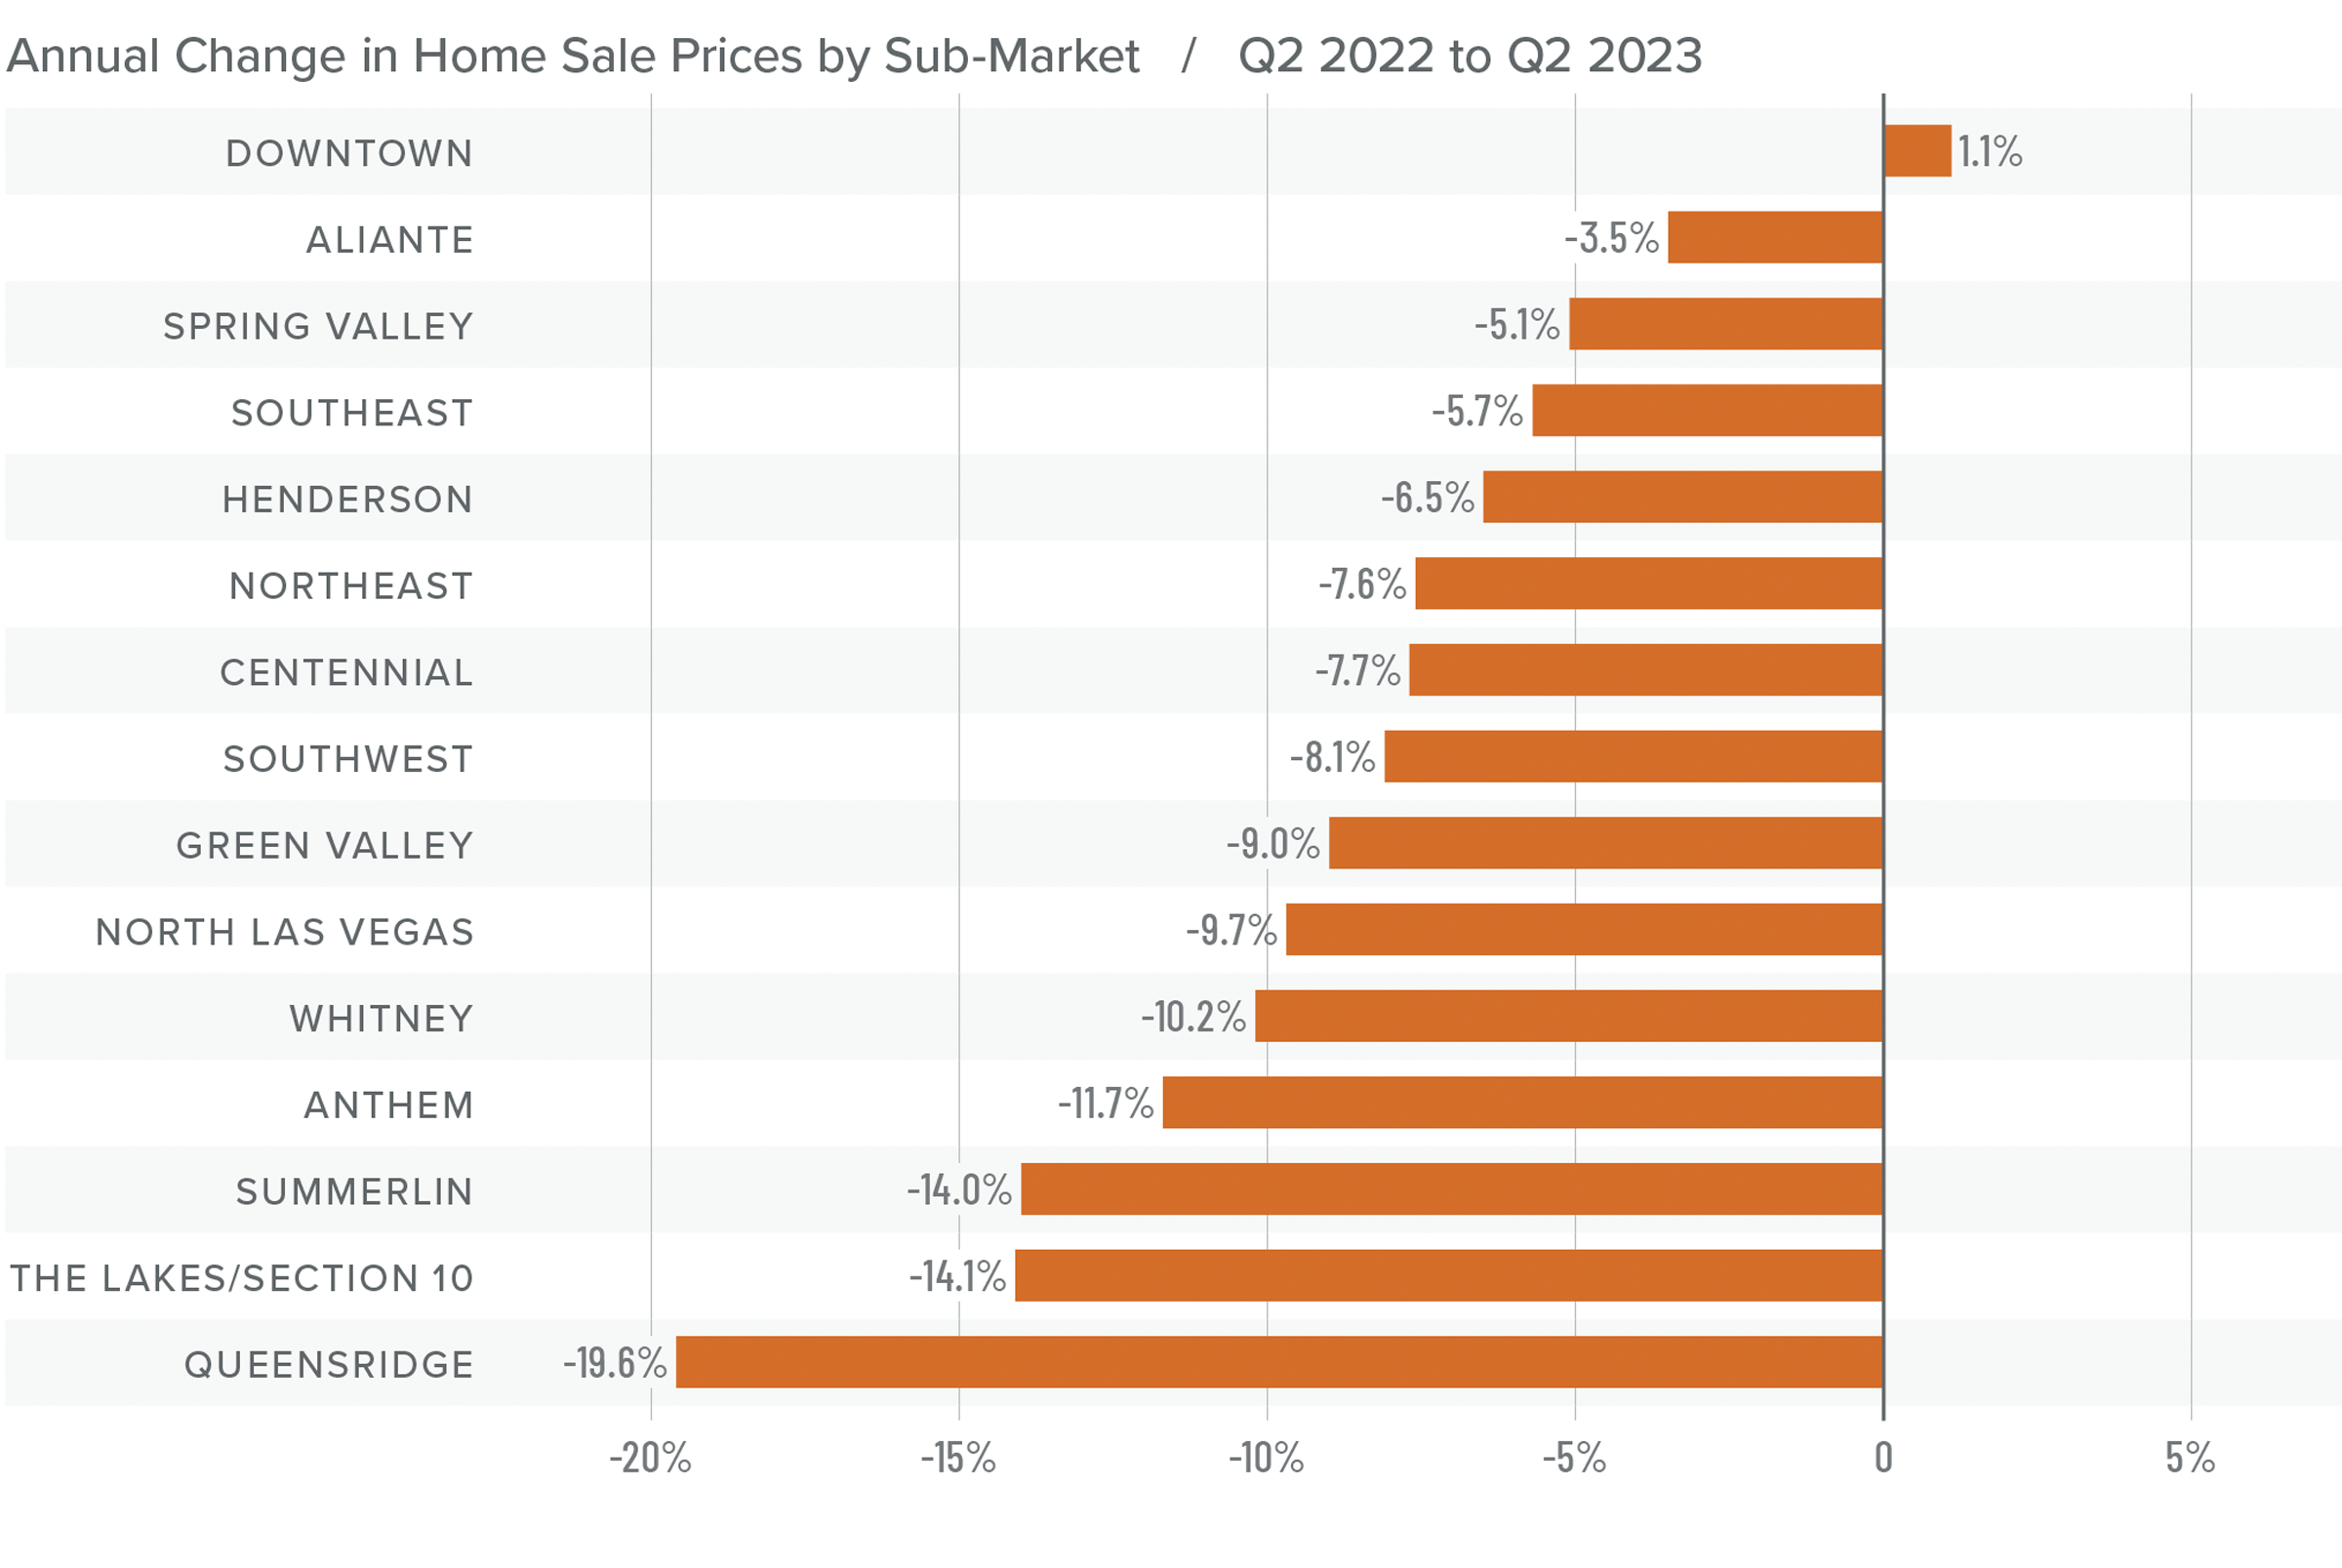 A bar graph showing the annual change in home sale prices by sub-market area in Nevada from Q2 2022 to Q2 2023. Downtown tops the list at 1.1%, while Queensridge had the greatest decline at -19.6%. Centennial and Southwest were toward the middle at around -8%.